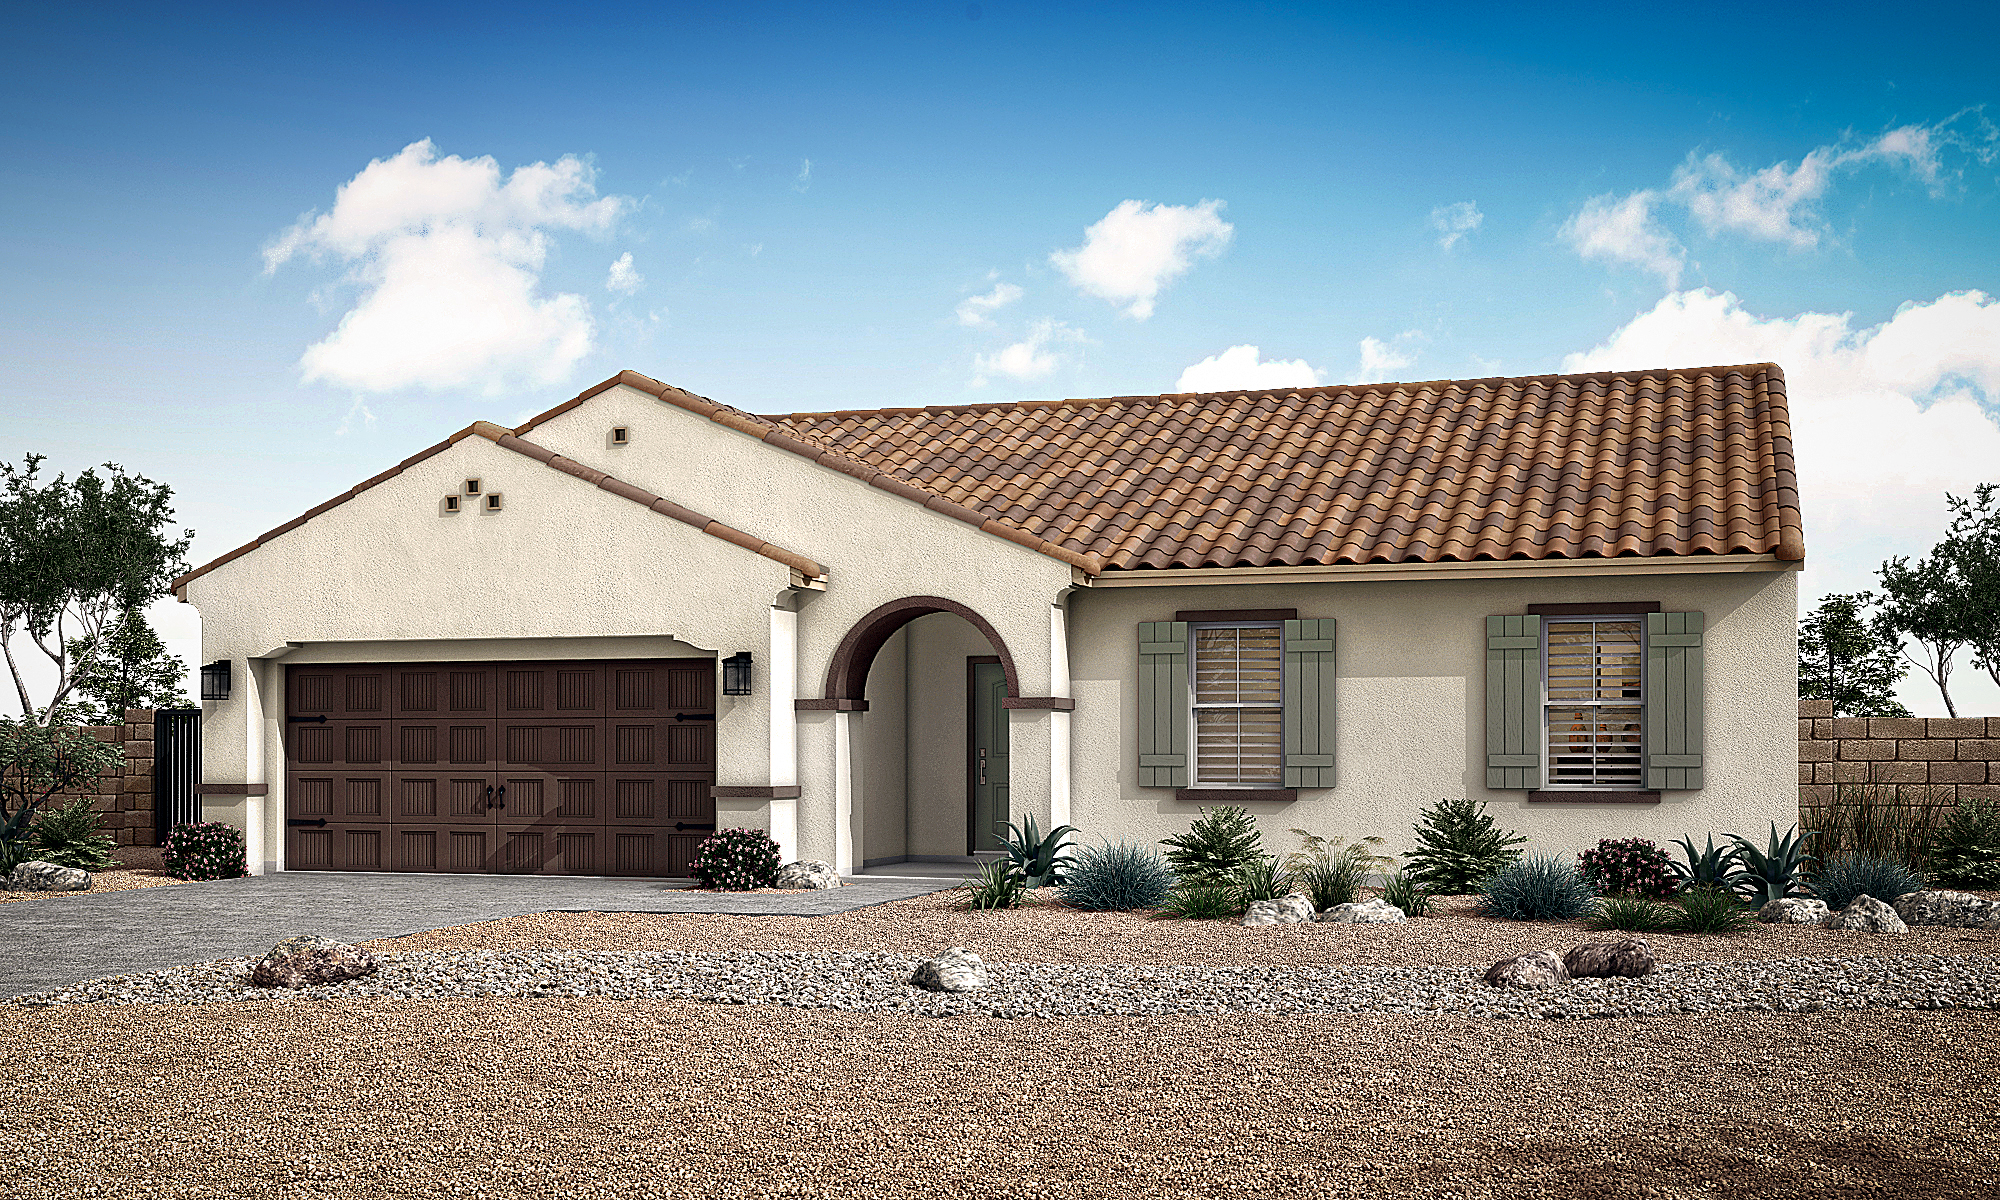 The Coronado plan is available at Desert Willow Village by LGI Homes